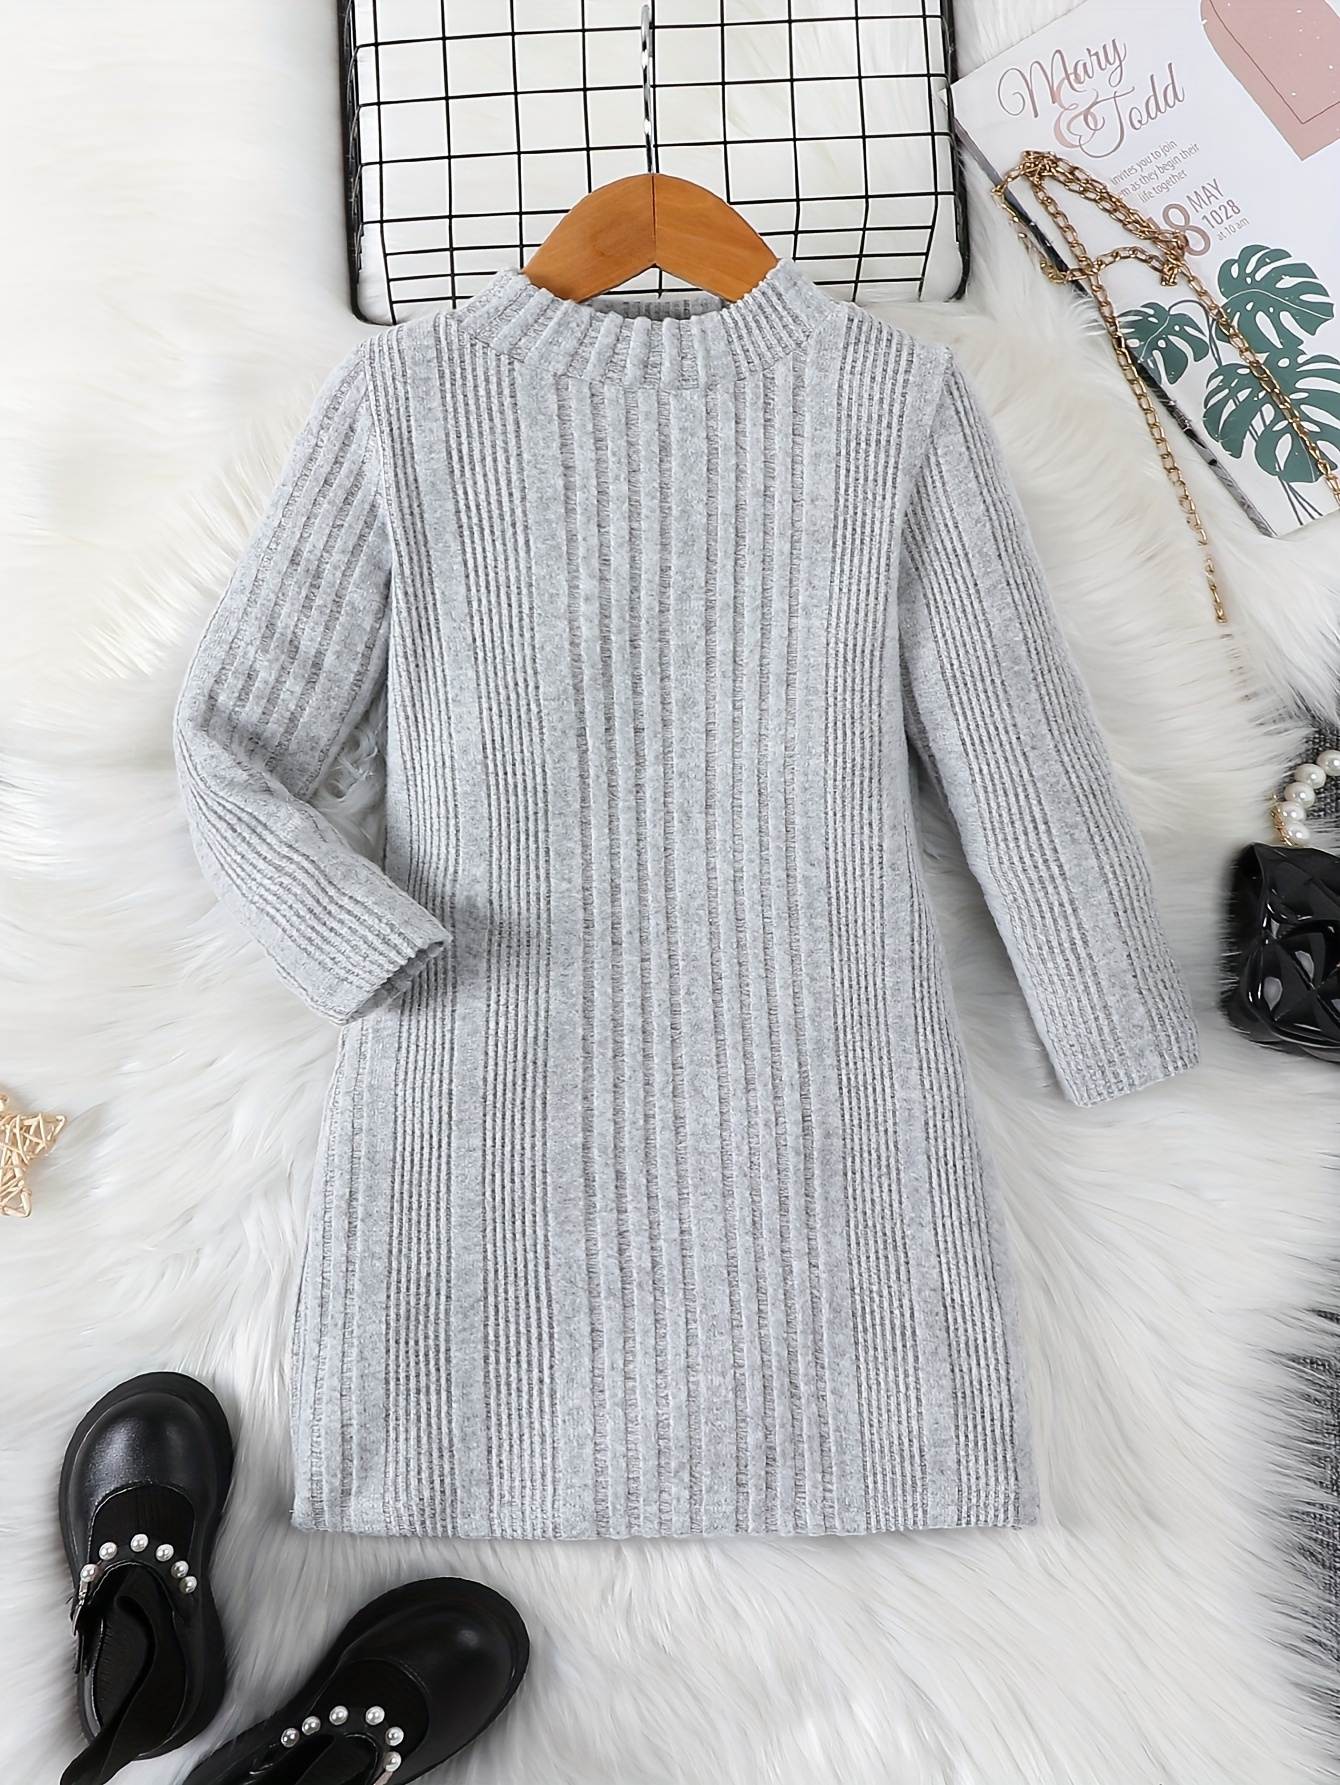 Girls Casual Knitted Thermal Crew Neck Sweater Dress For Winter